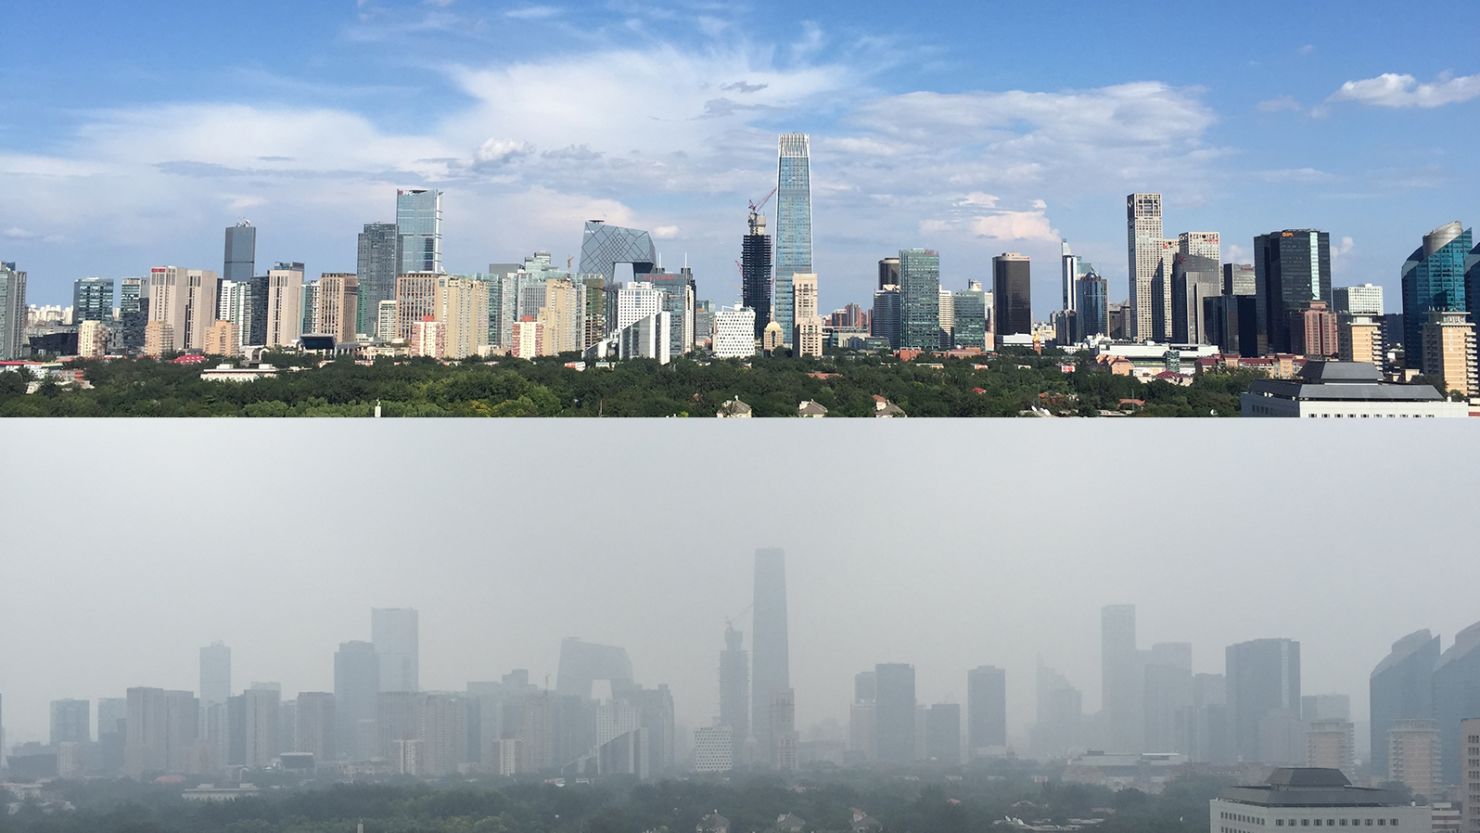 This photo shows two images of the view from CNN's Beijing Bureau, one of a blue sky day from a week before the military parade and one of a hazy sky the day after the parade.